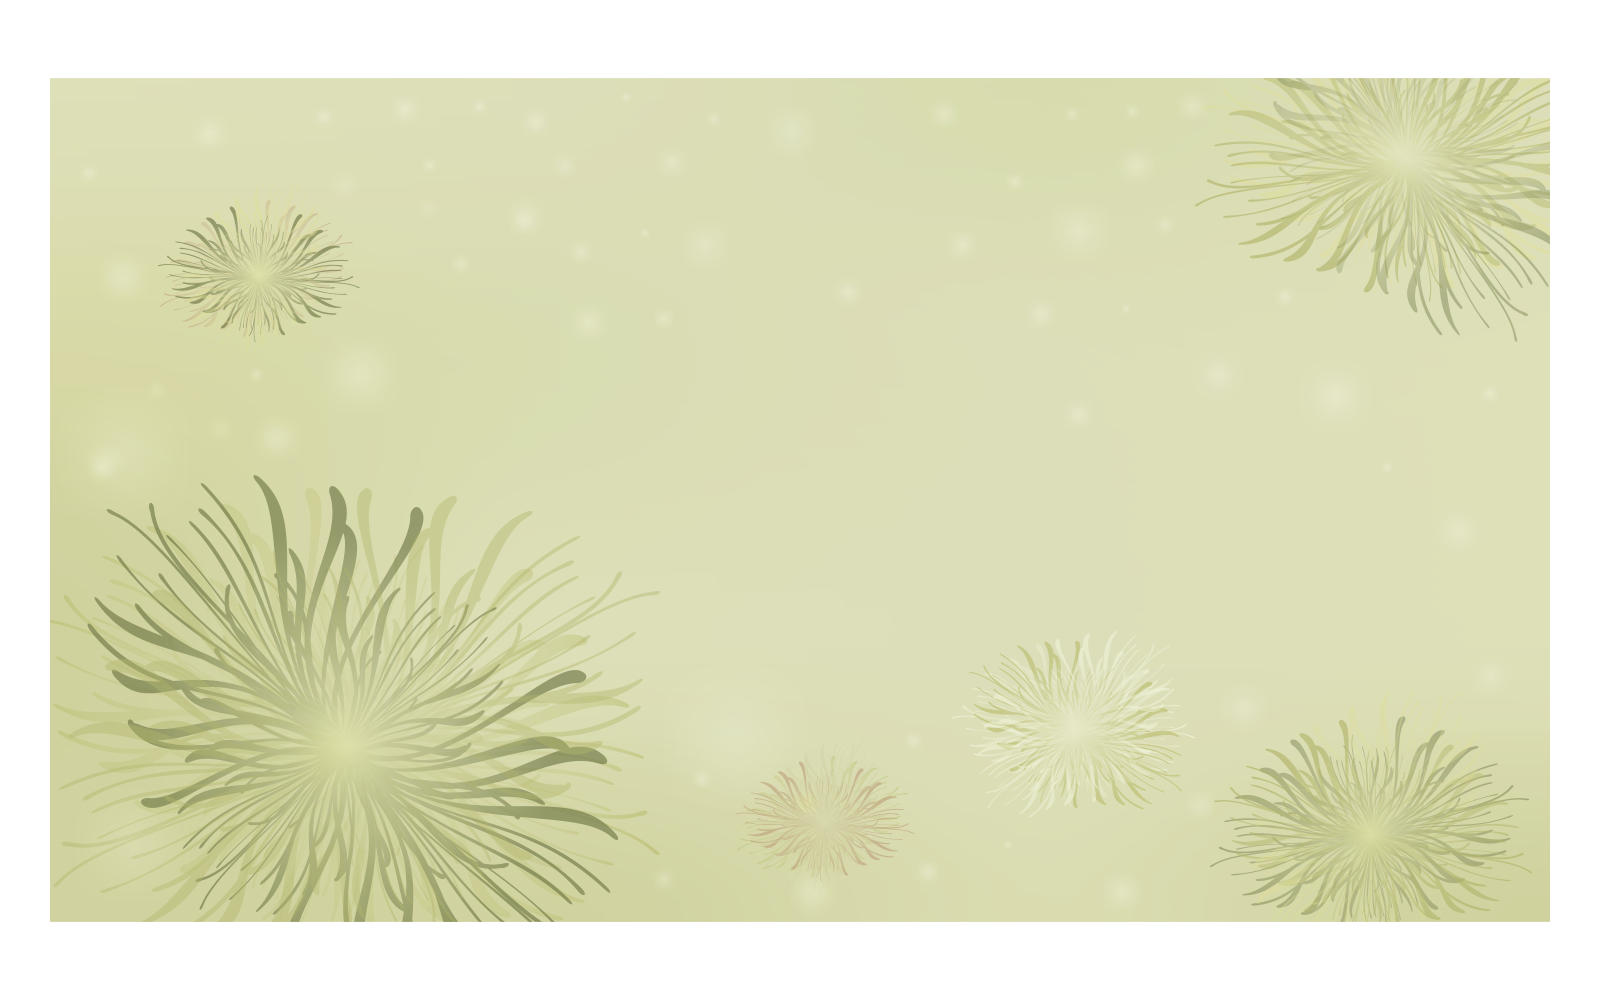 Background Image in Olive Color Scheme with Flowers and Sparks